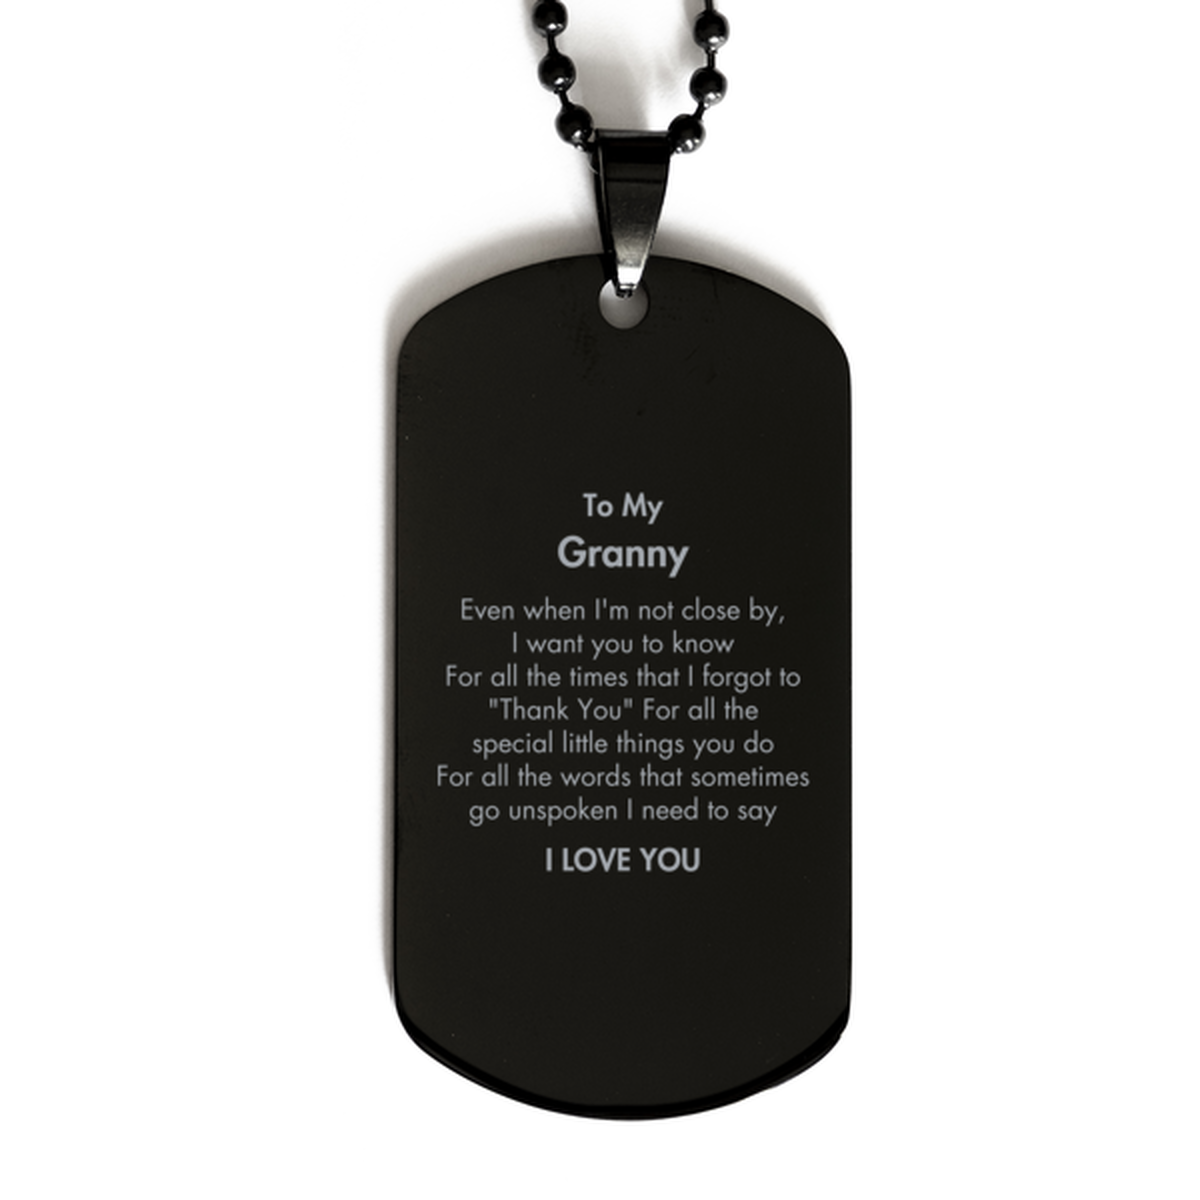 Thank You Gifts for Granny, Keepsake Black Dog Tag Gifts for Granny Birthday Mother's day Father's Day Granny For all the words That sometimes go unspoken I need to say I LOVE YOU